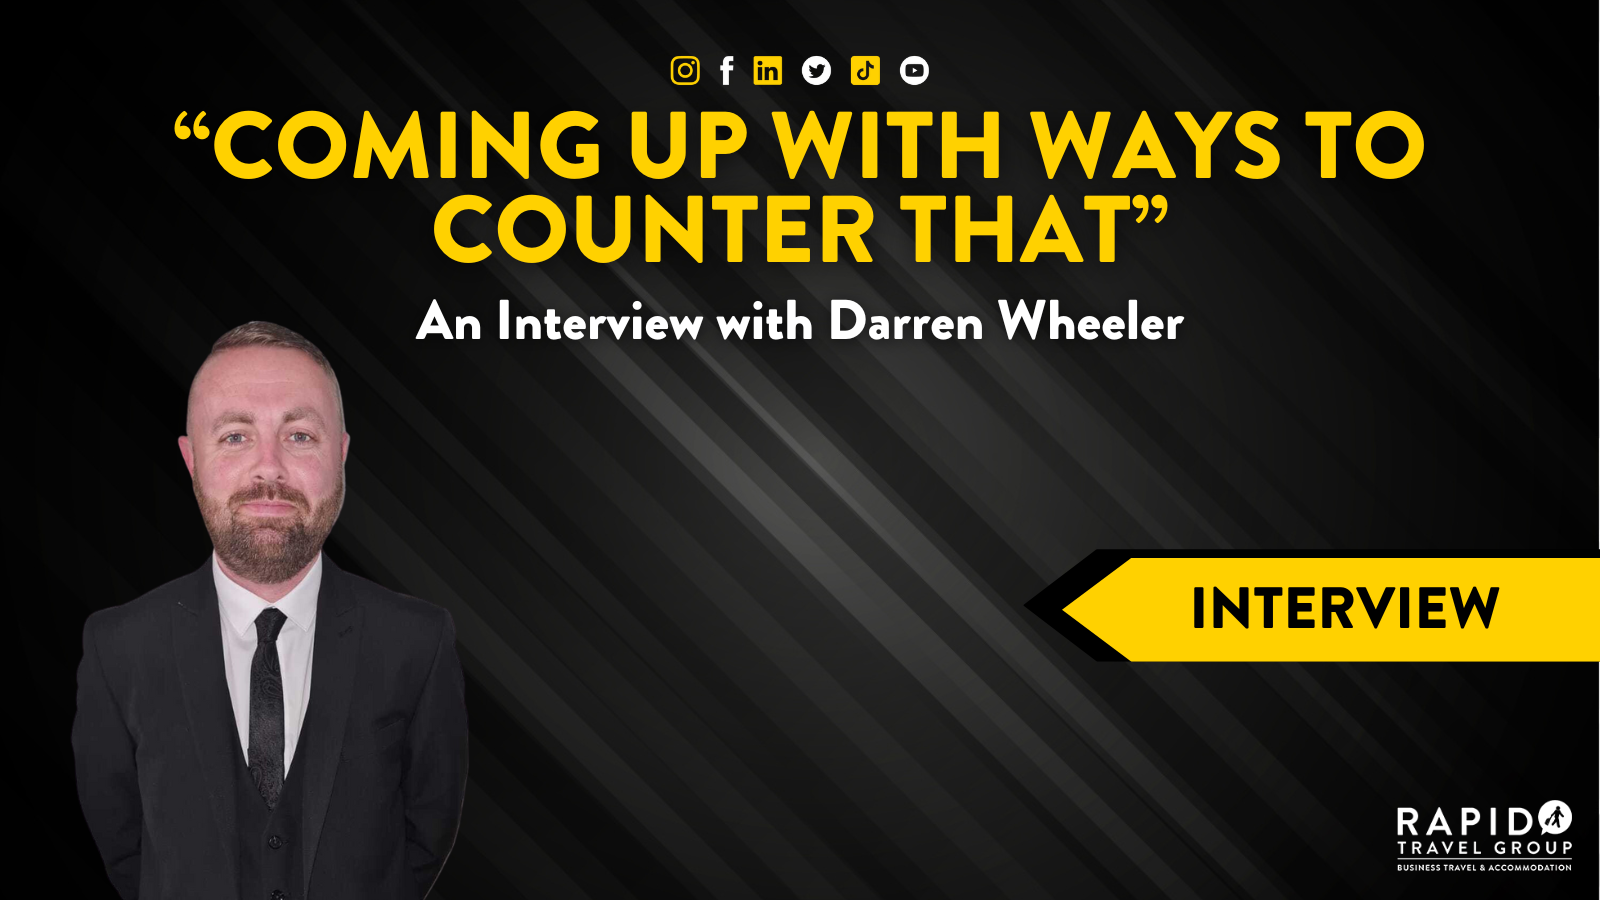 “Coming Up With Ways To Counter That”: An Interview With Darren Wheeler